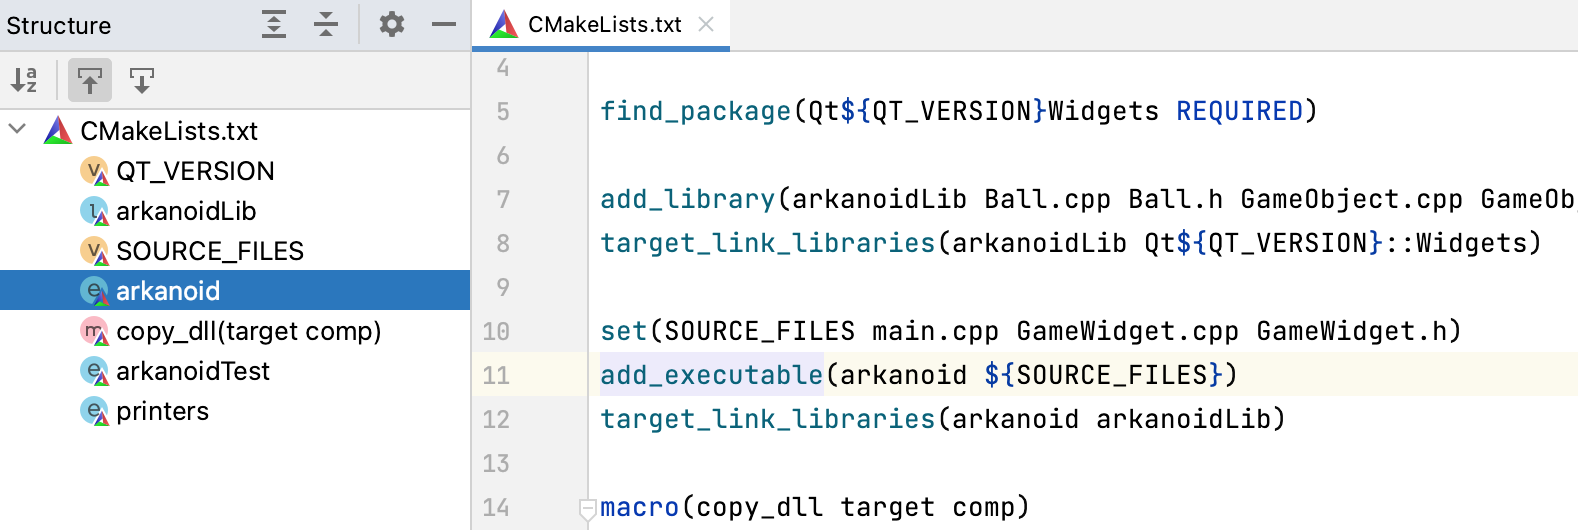 CMake structure view